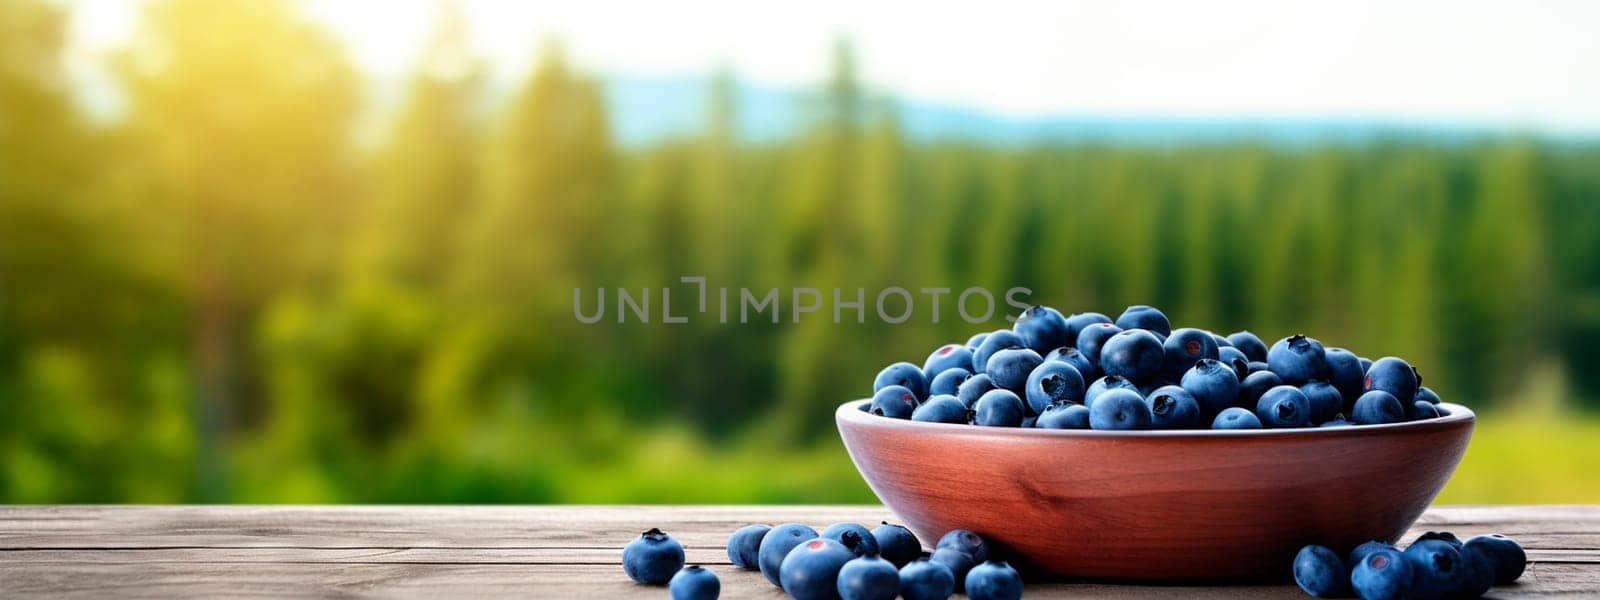 Blueberries in a bowl in the garden. Selective focus. by yanadjana